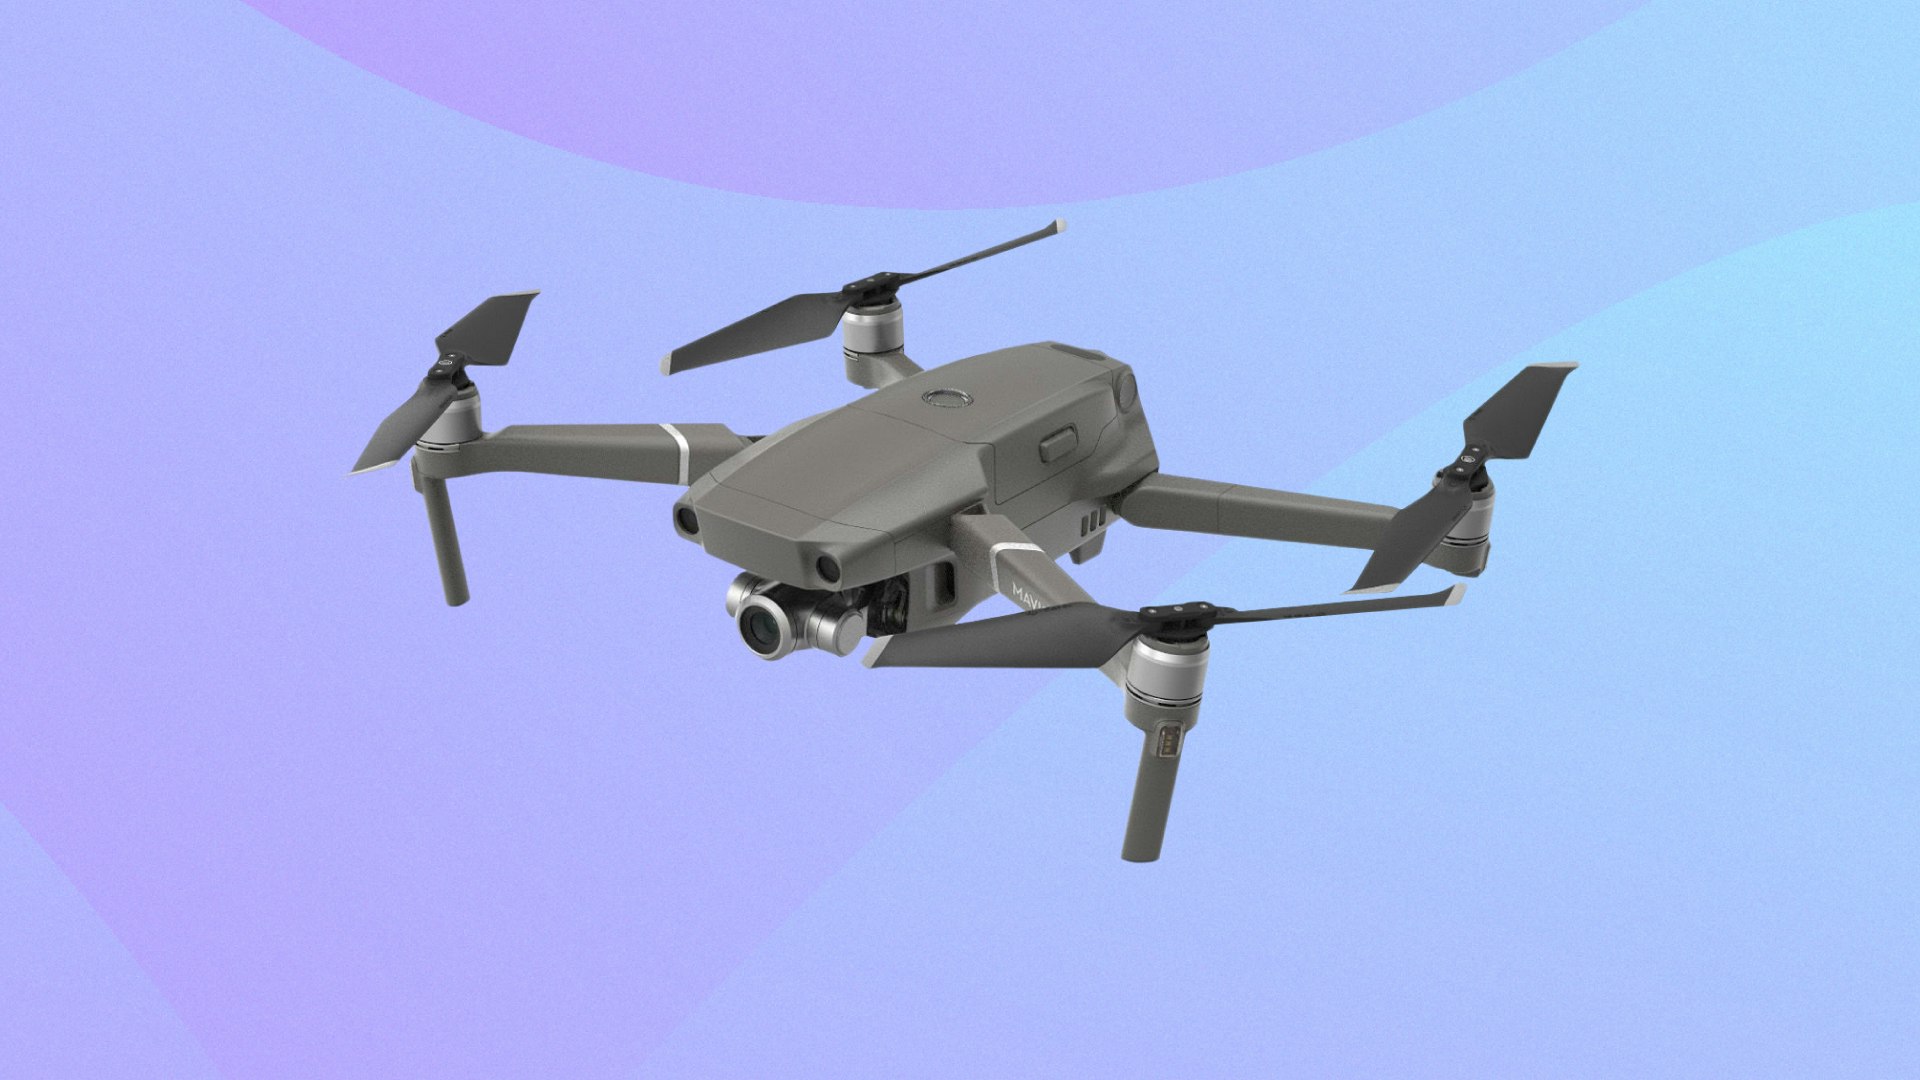 A definitive list of affordable drones - Vimeo Blog